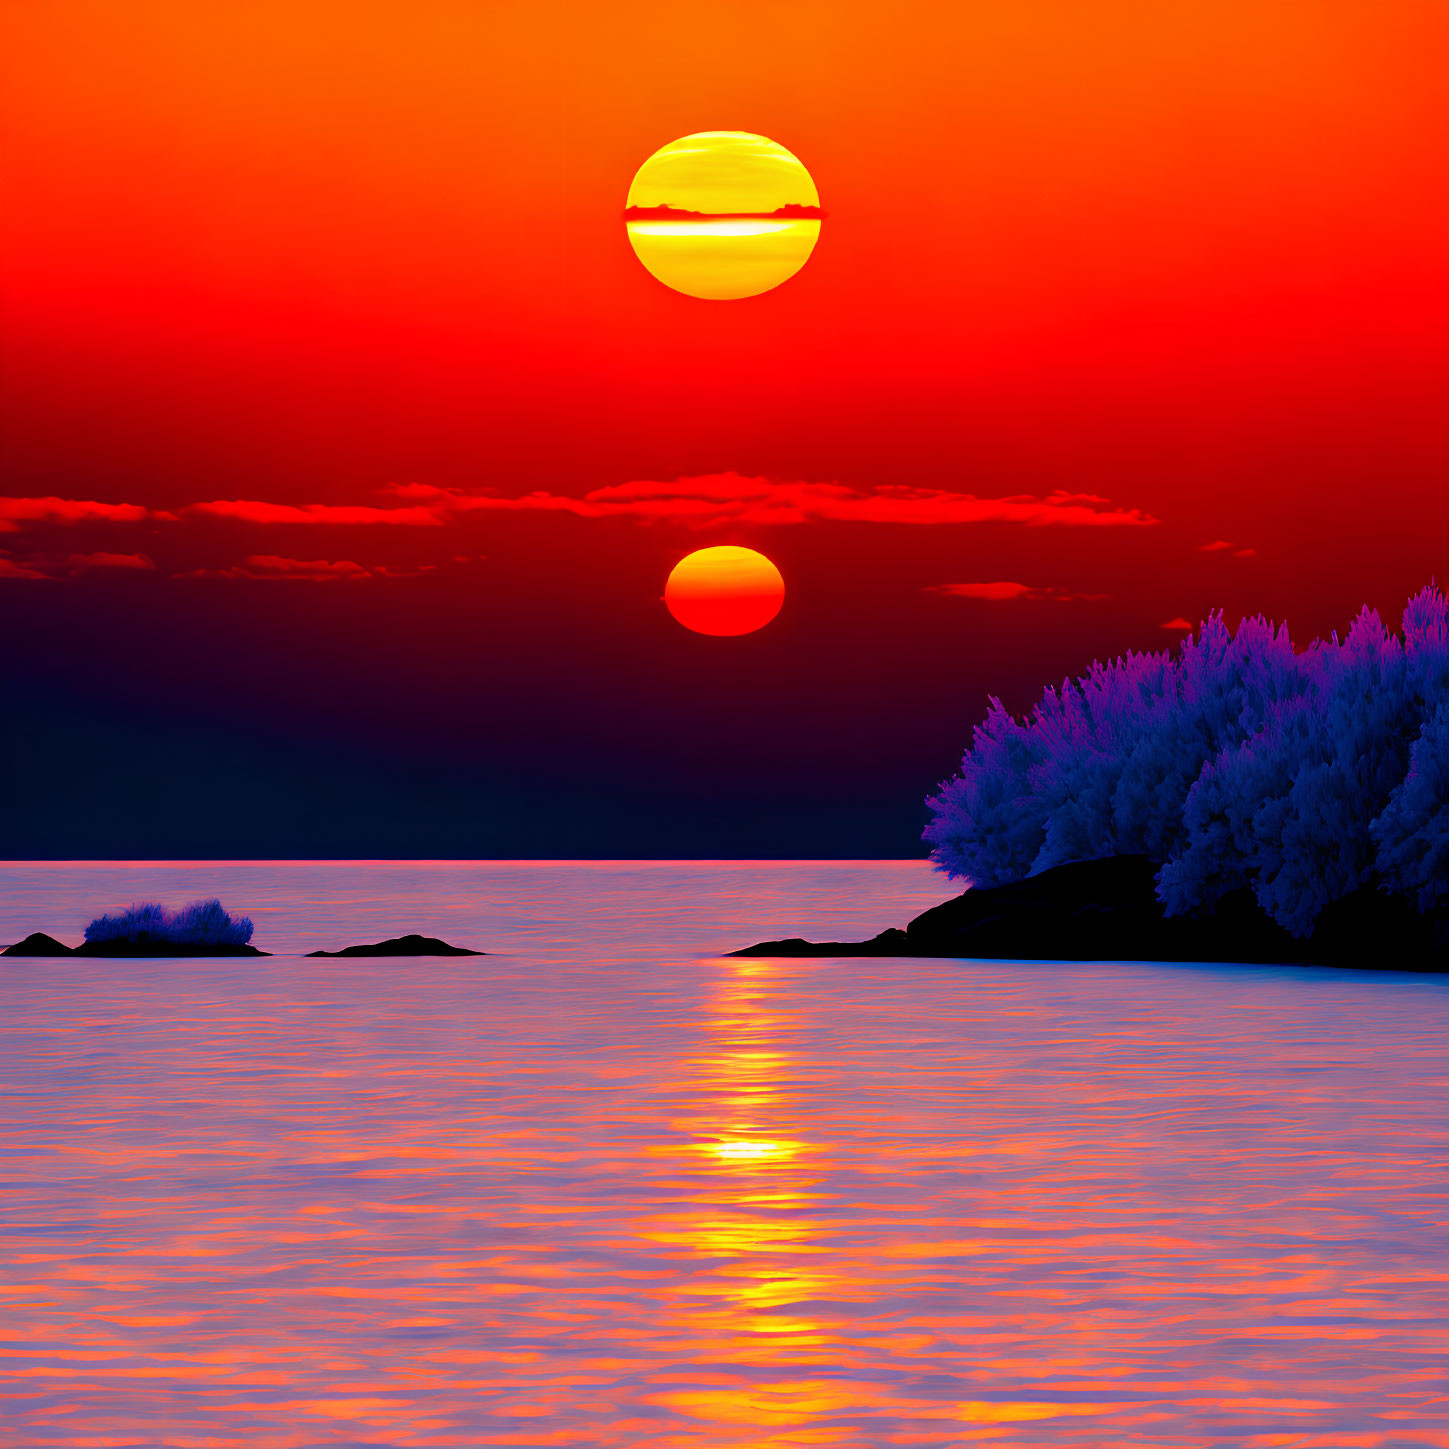 Scenic sunset with large sun, tranquil water, trees, and rocks